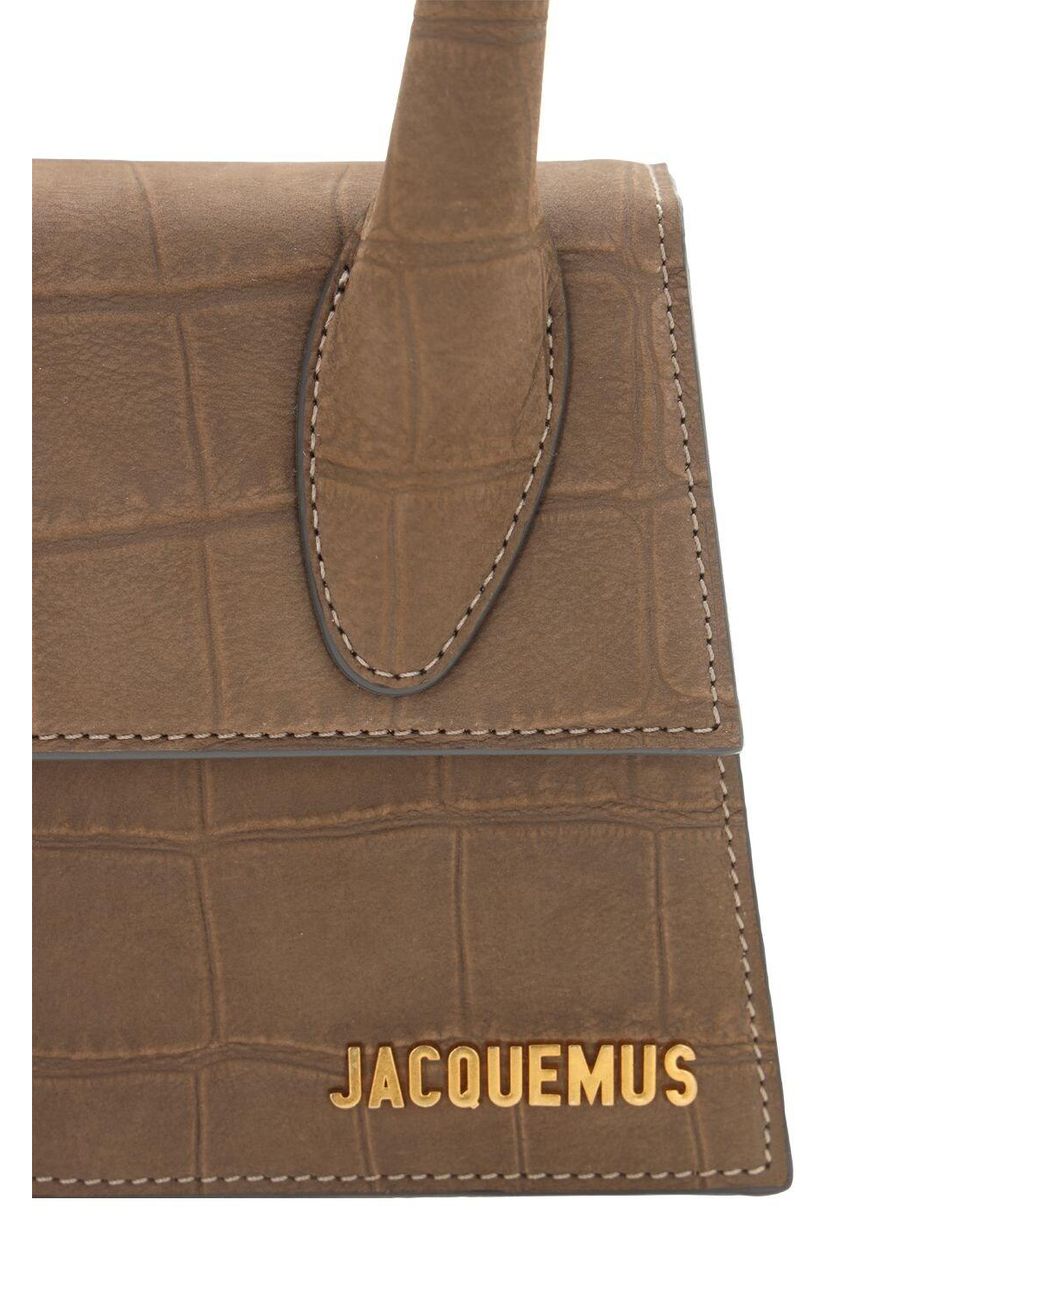 Jacquemus Le Chiquito Moyen Croc Embossed Bag in Natural | Lyst